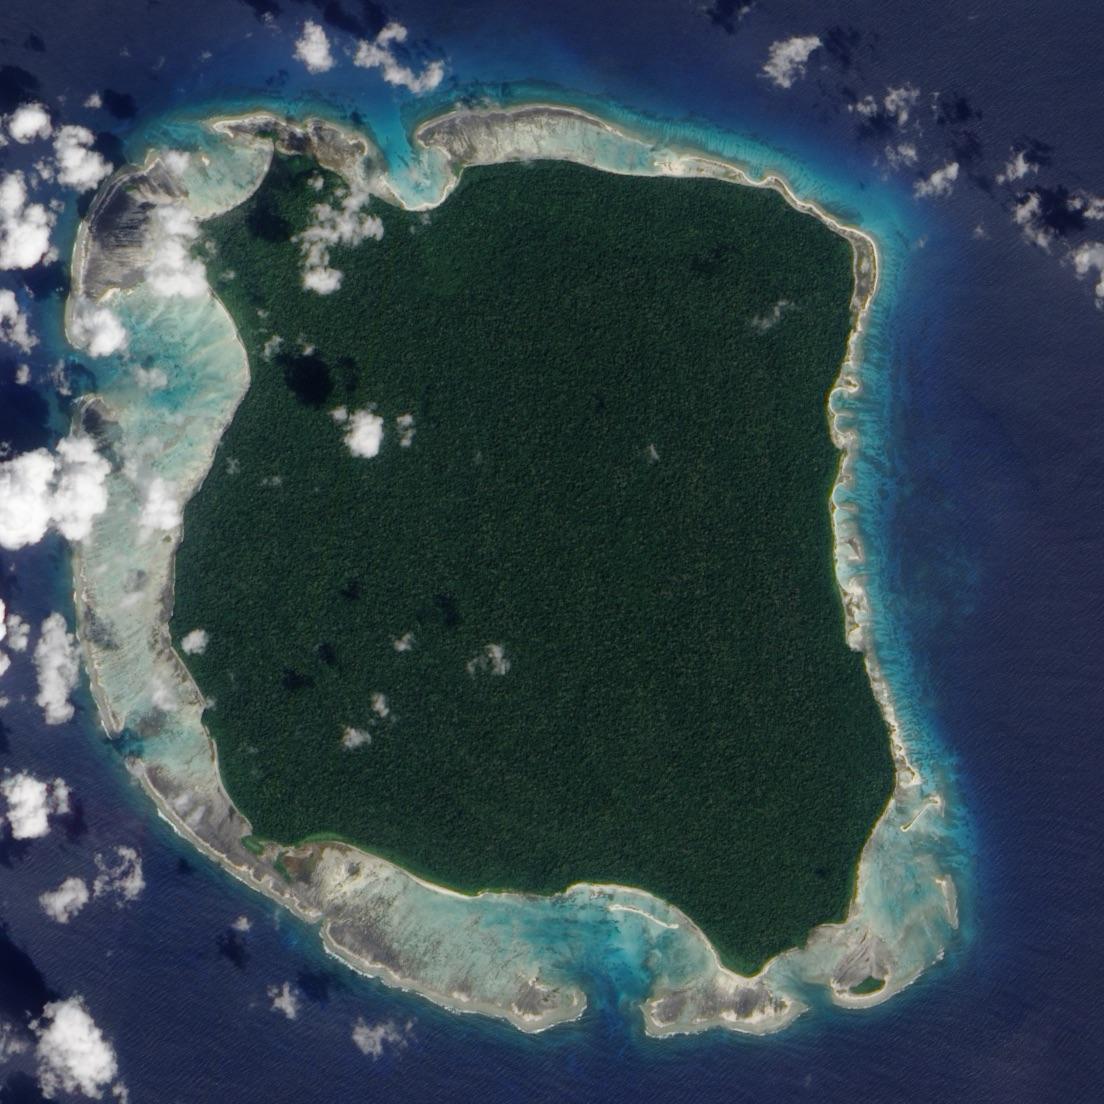 This is North Sentinel Island, and is one of the last areas on earth to be remained untouched by modern civilization.